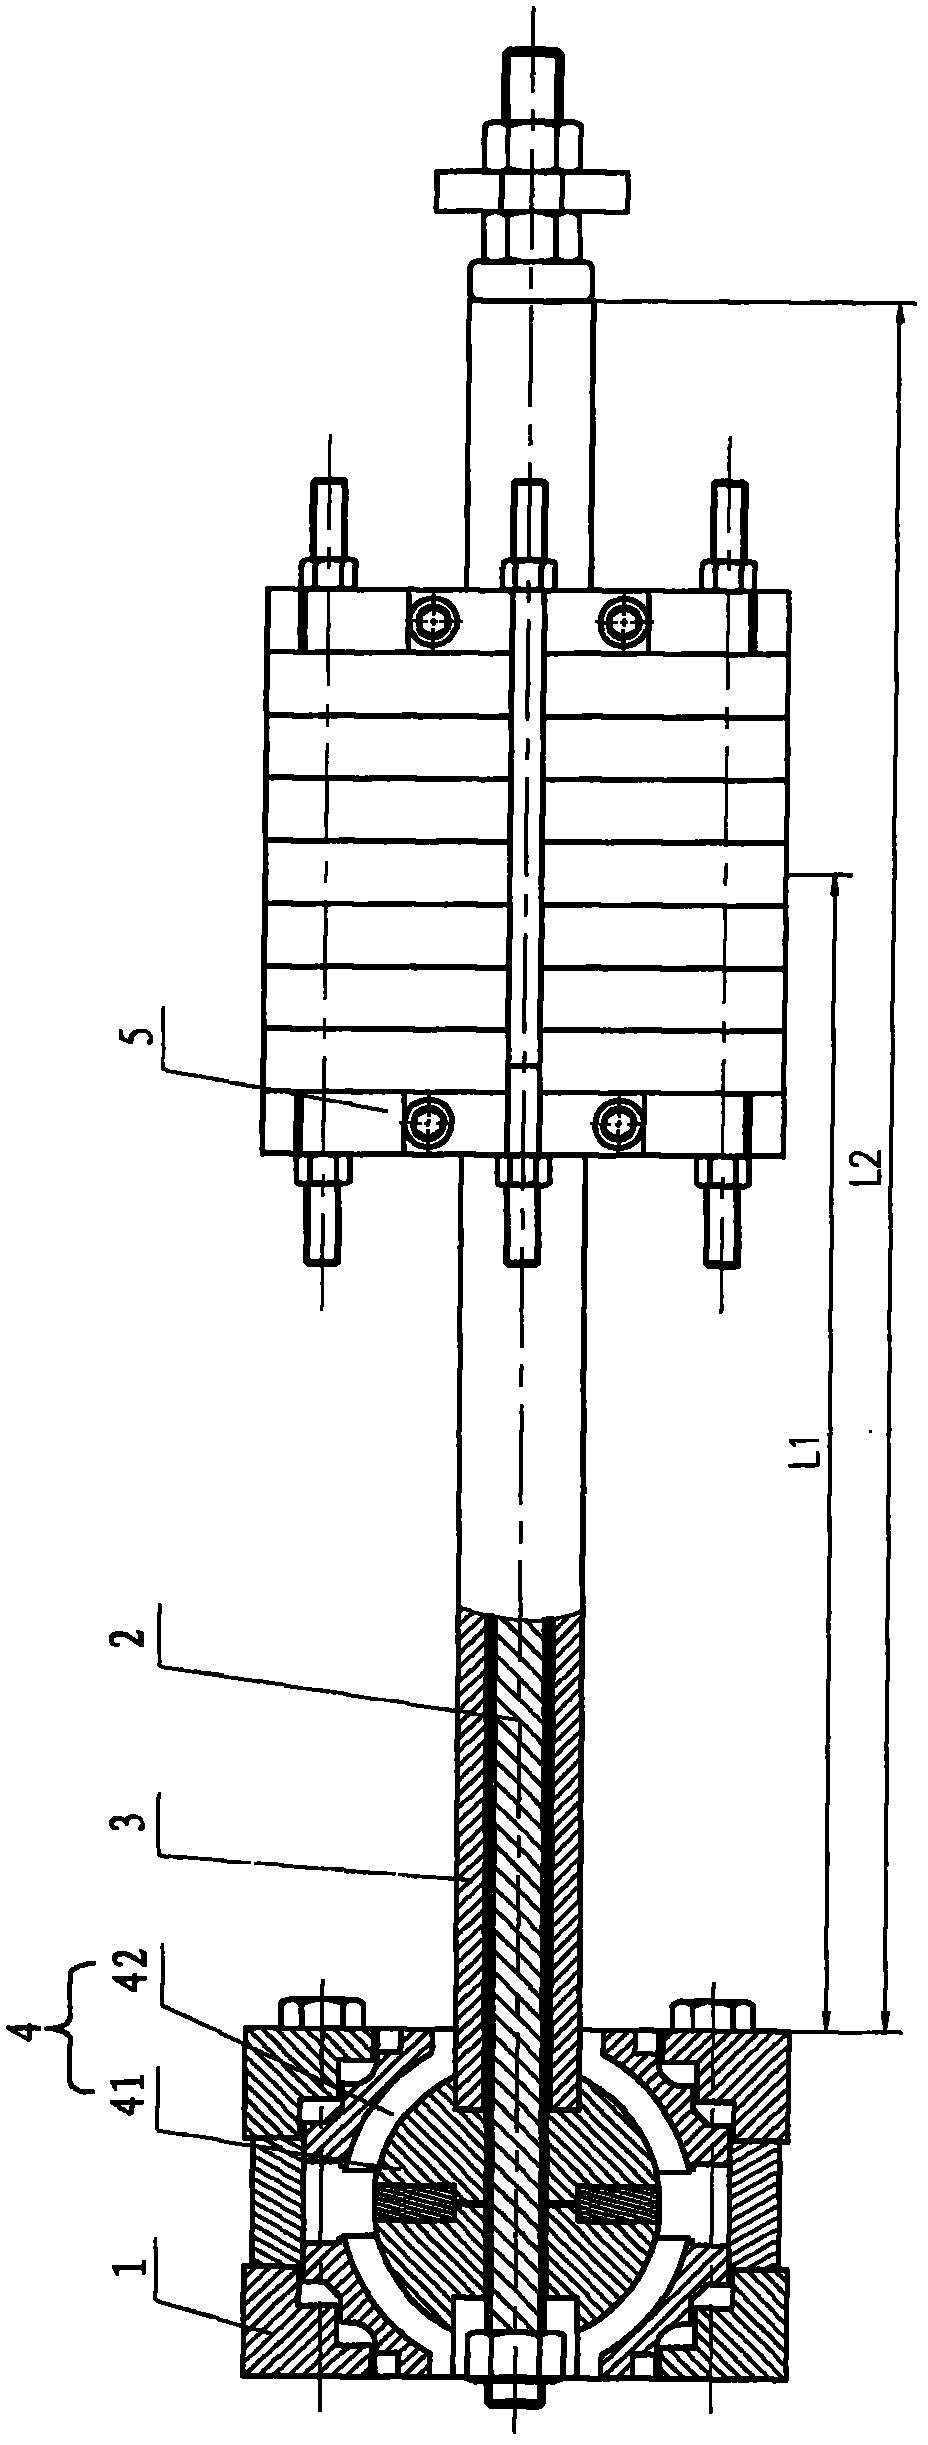 Vibration absorption control device for tuned mass damper